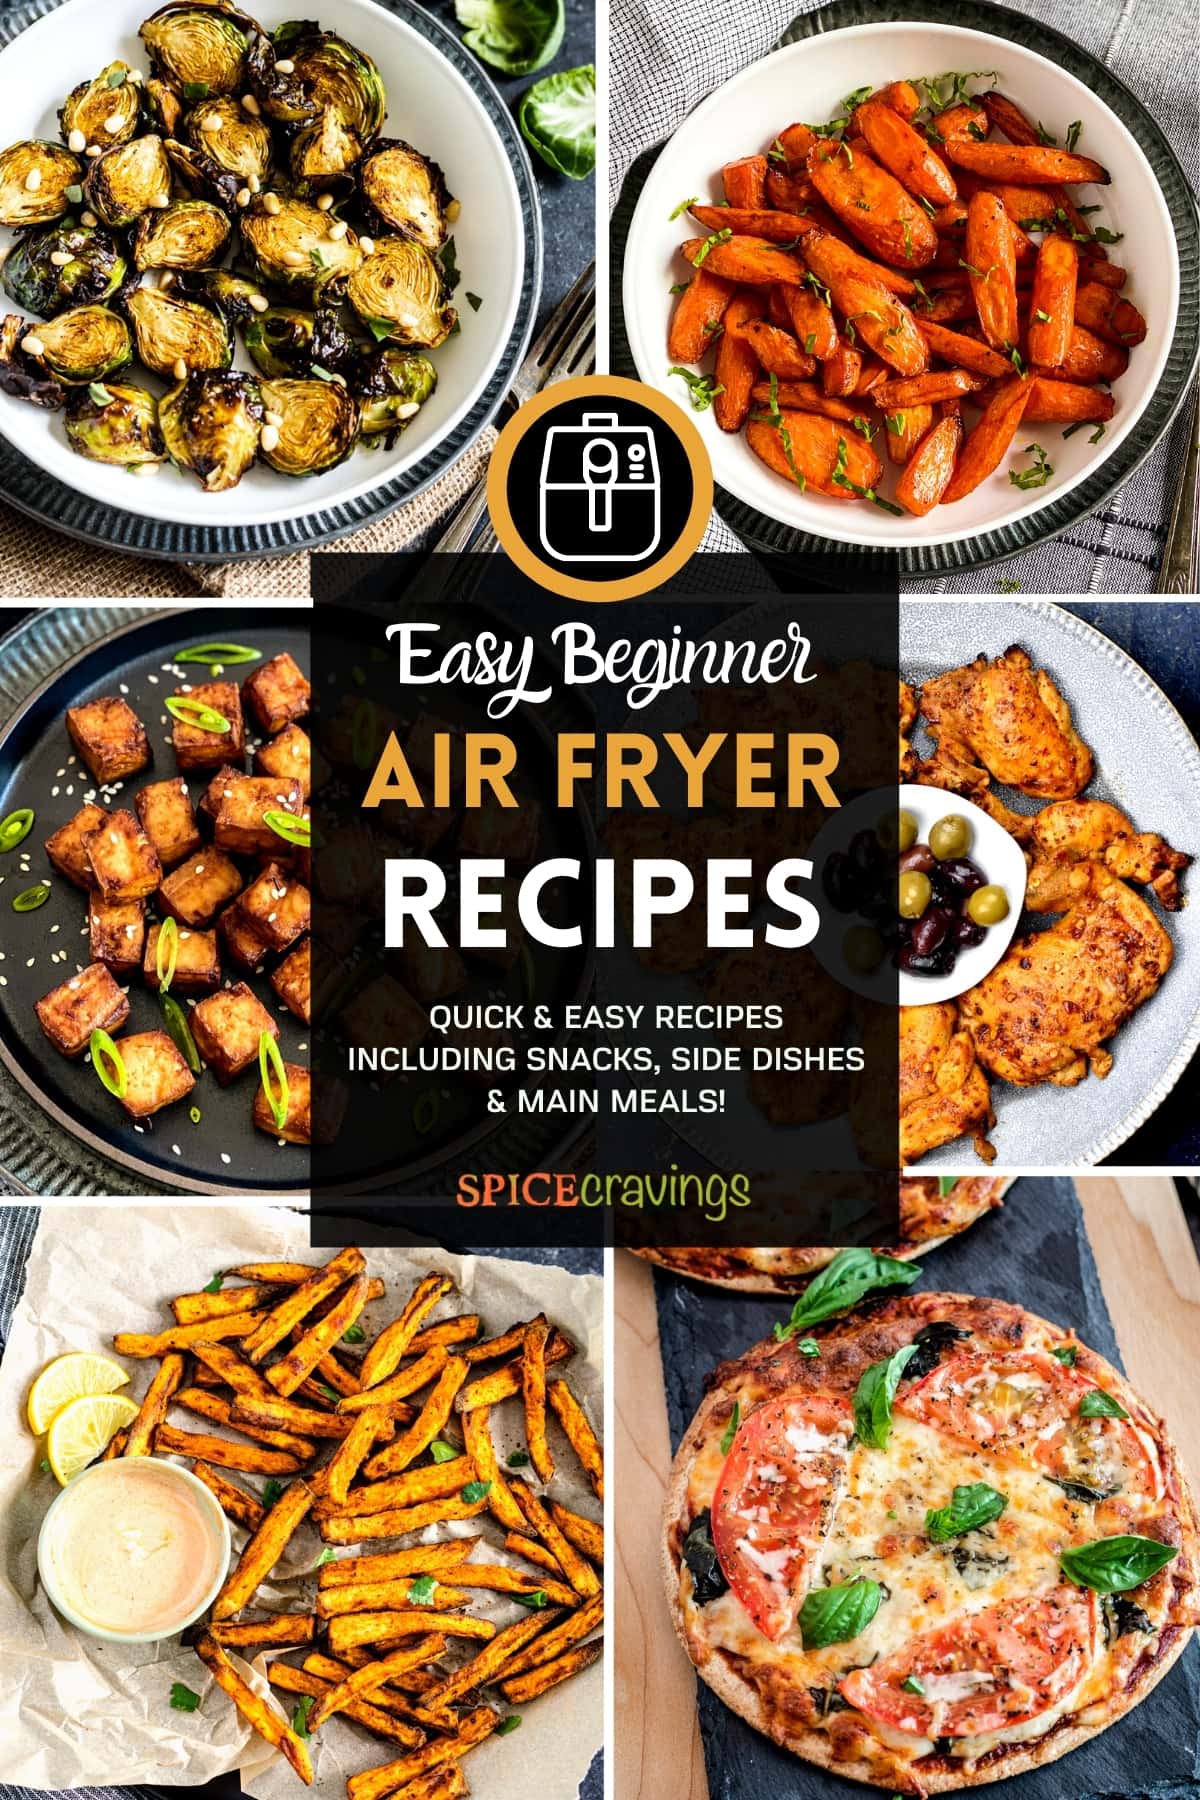 Air Fryer Recipes for Beginners - Spice Cravings